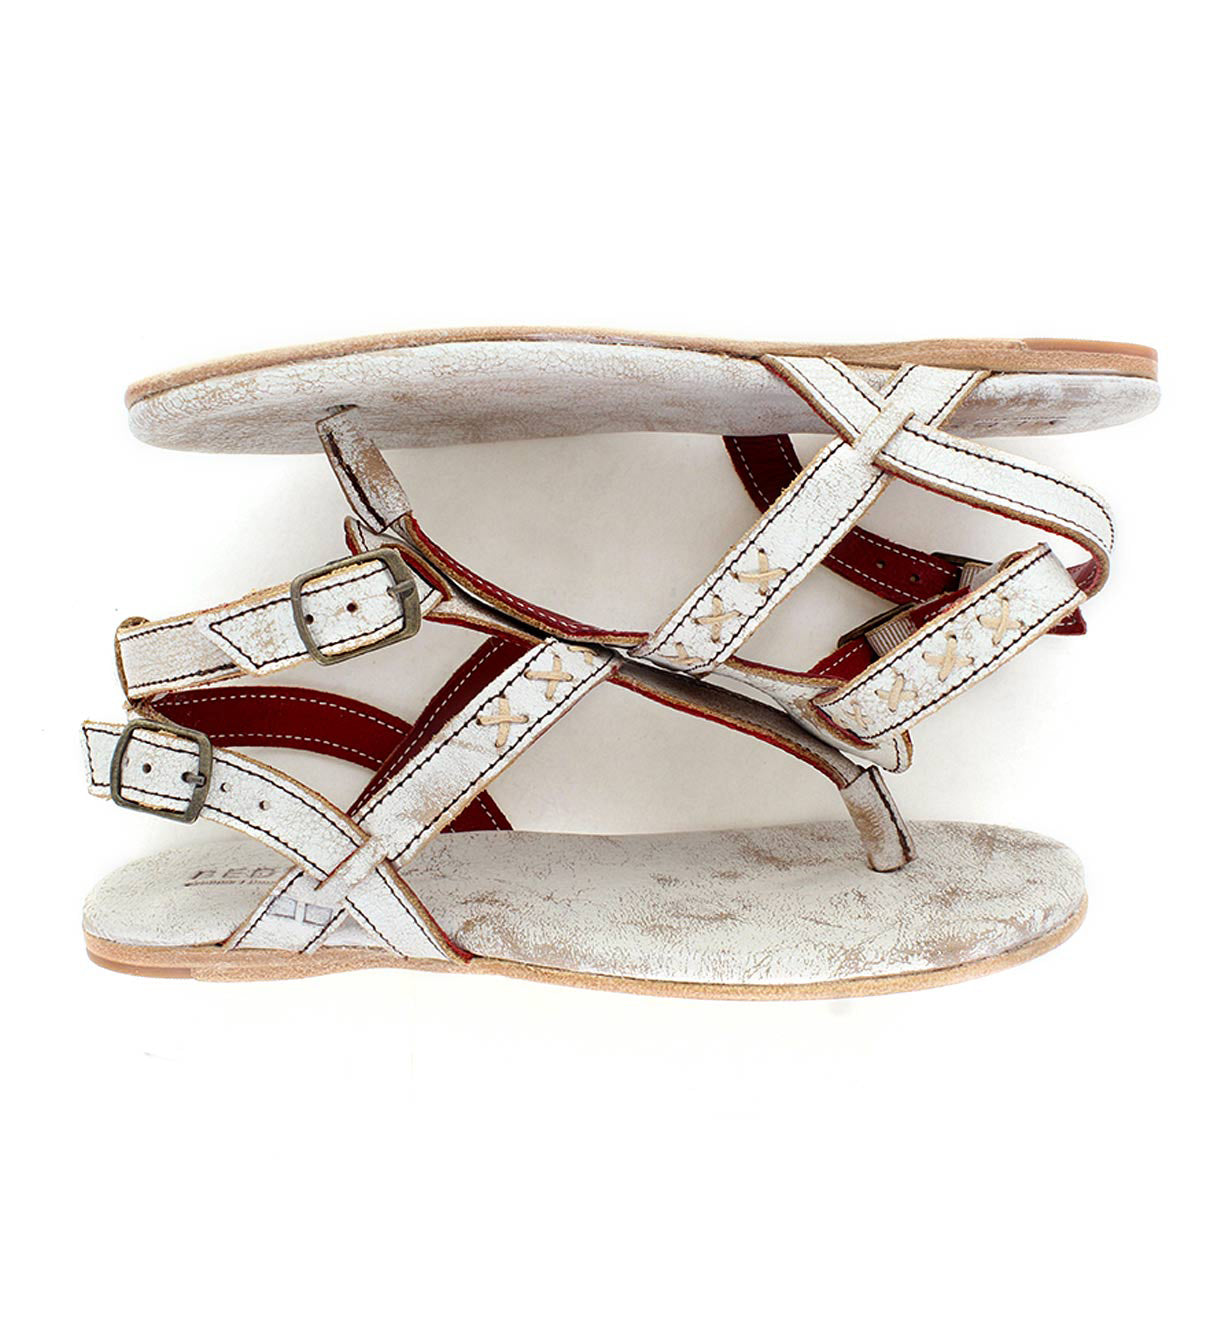 A pair of Moon sandals with red straps from the brand Bed Stu.